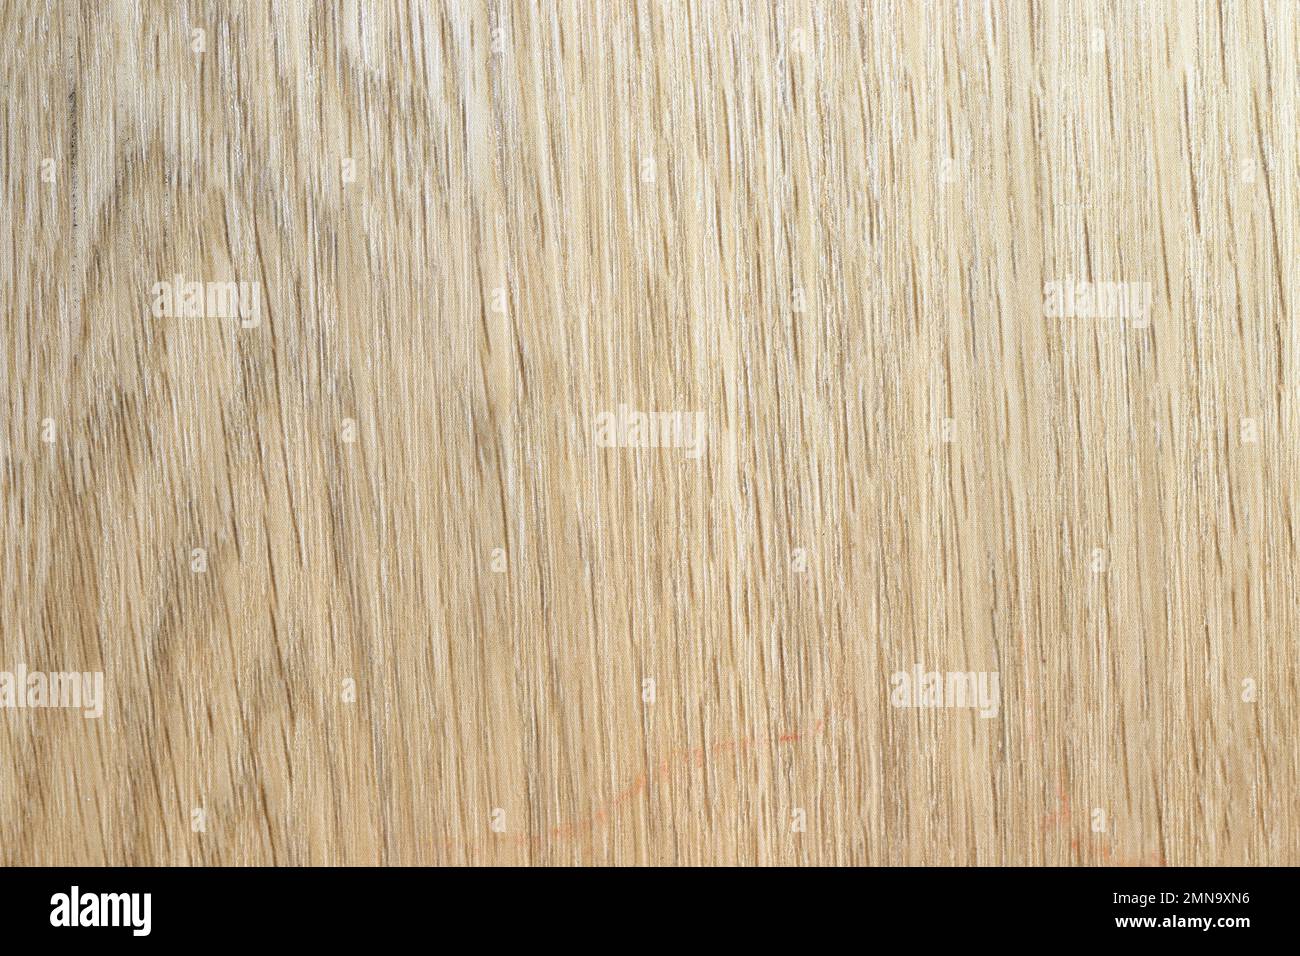 close up of vinyl spc (stone composite) tile texture, use for wooden flooring material. Stock Photo